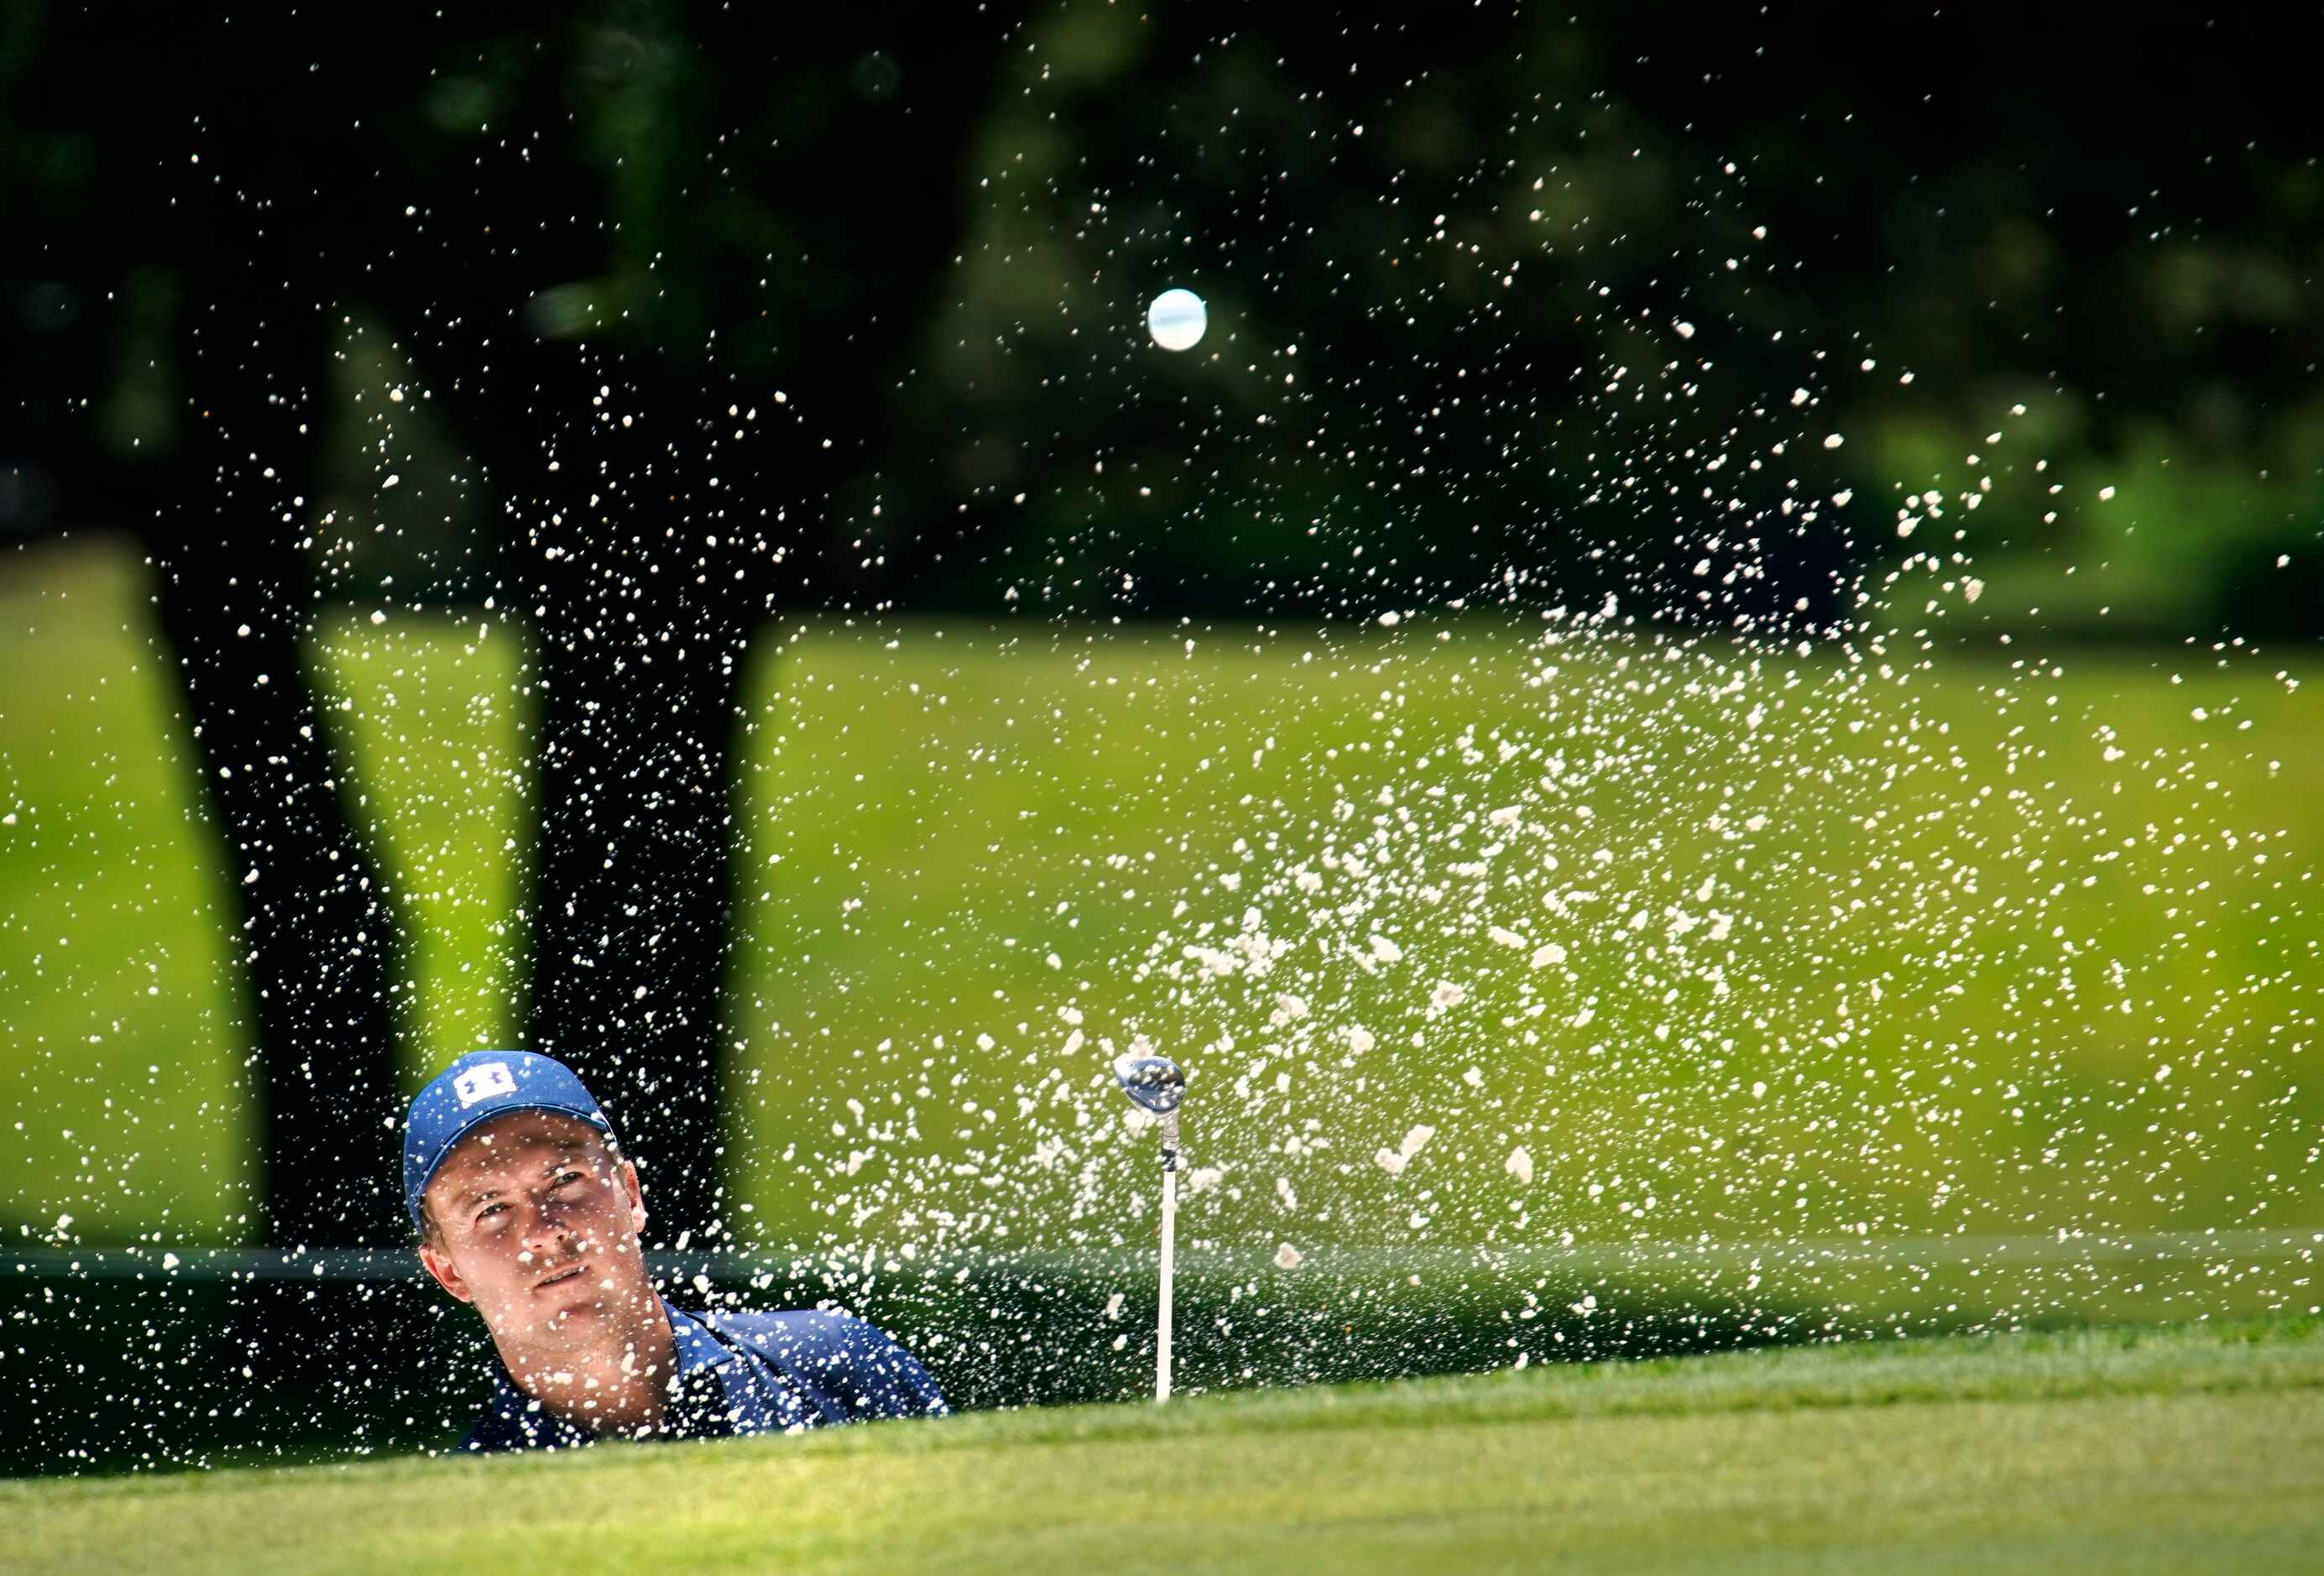 PGA Tour golfer Jordan Spieth splashes his ball out of the greenside bunker on No. 2 during...